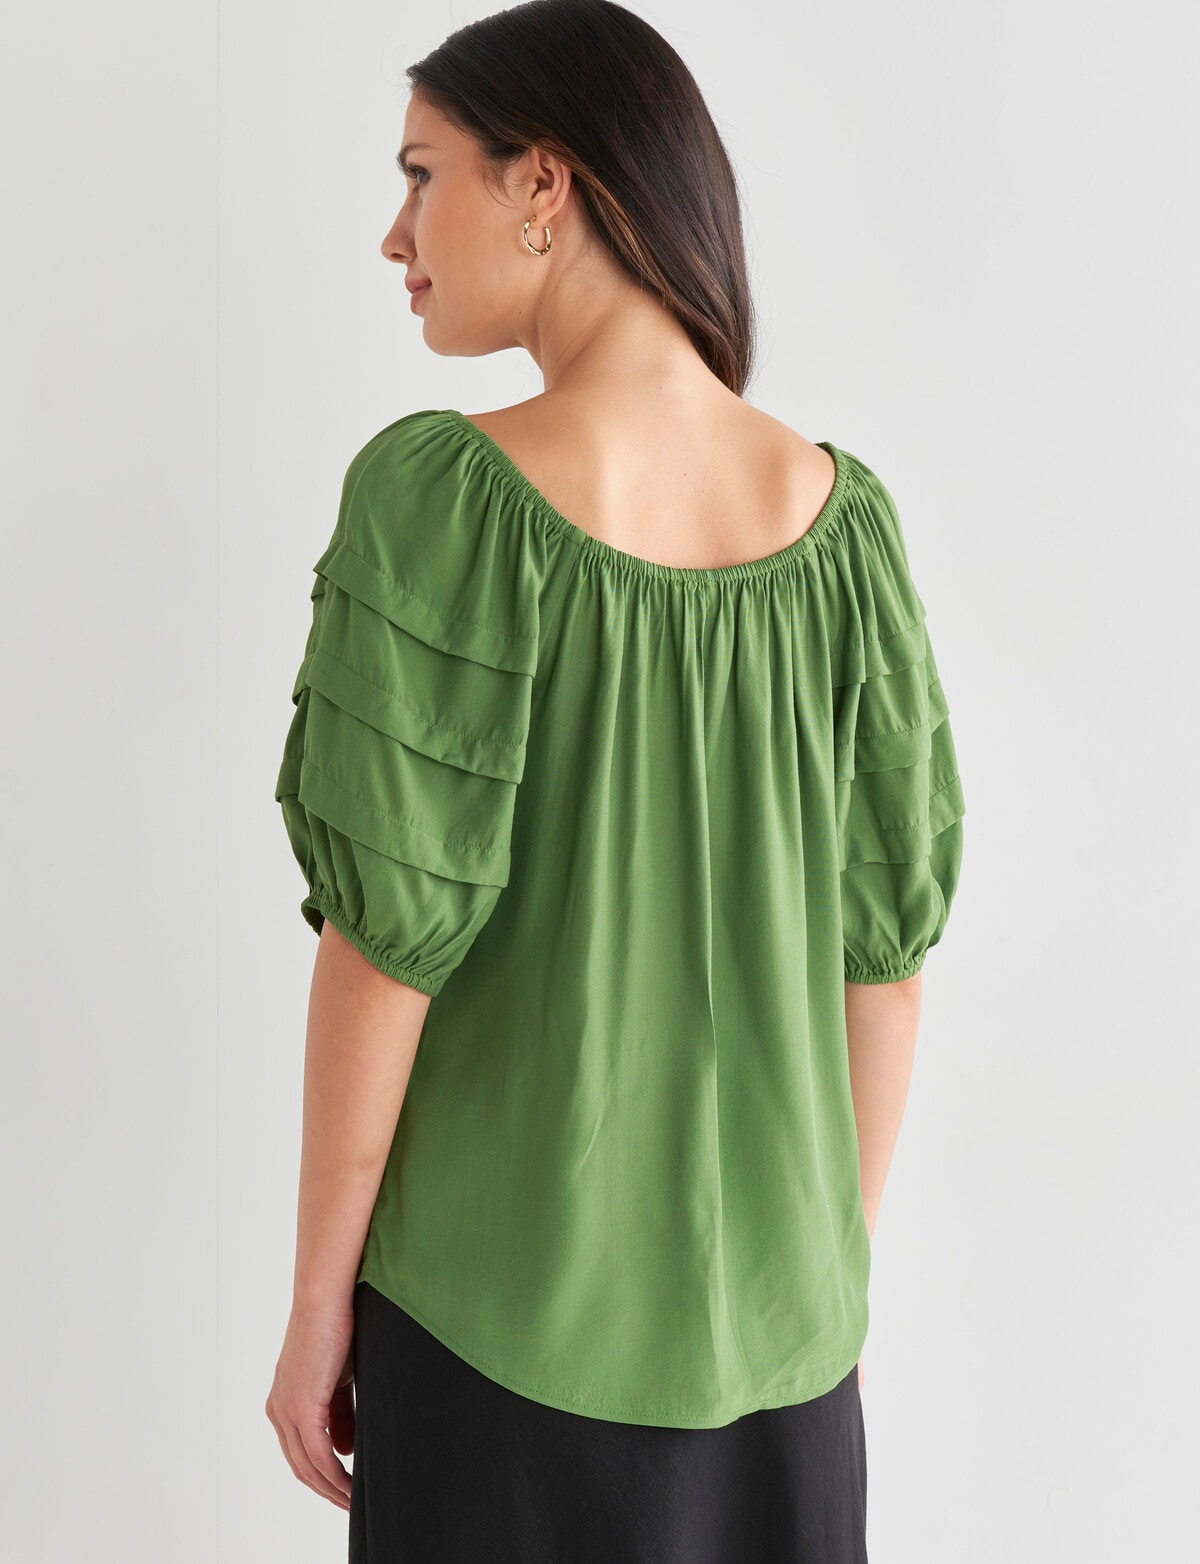 Whistle Puff Sleeve Top, Leaf - Tops